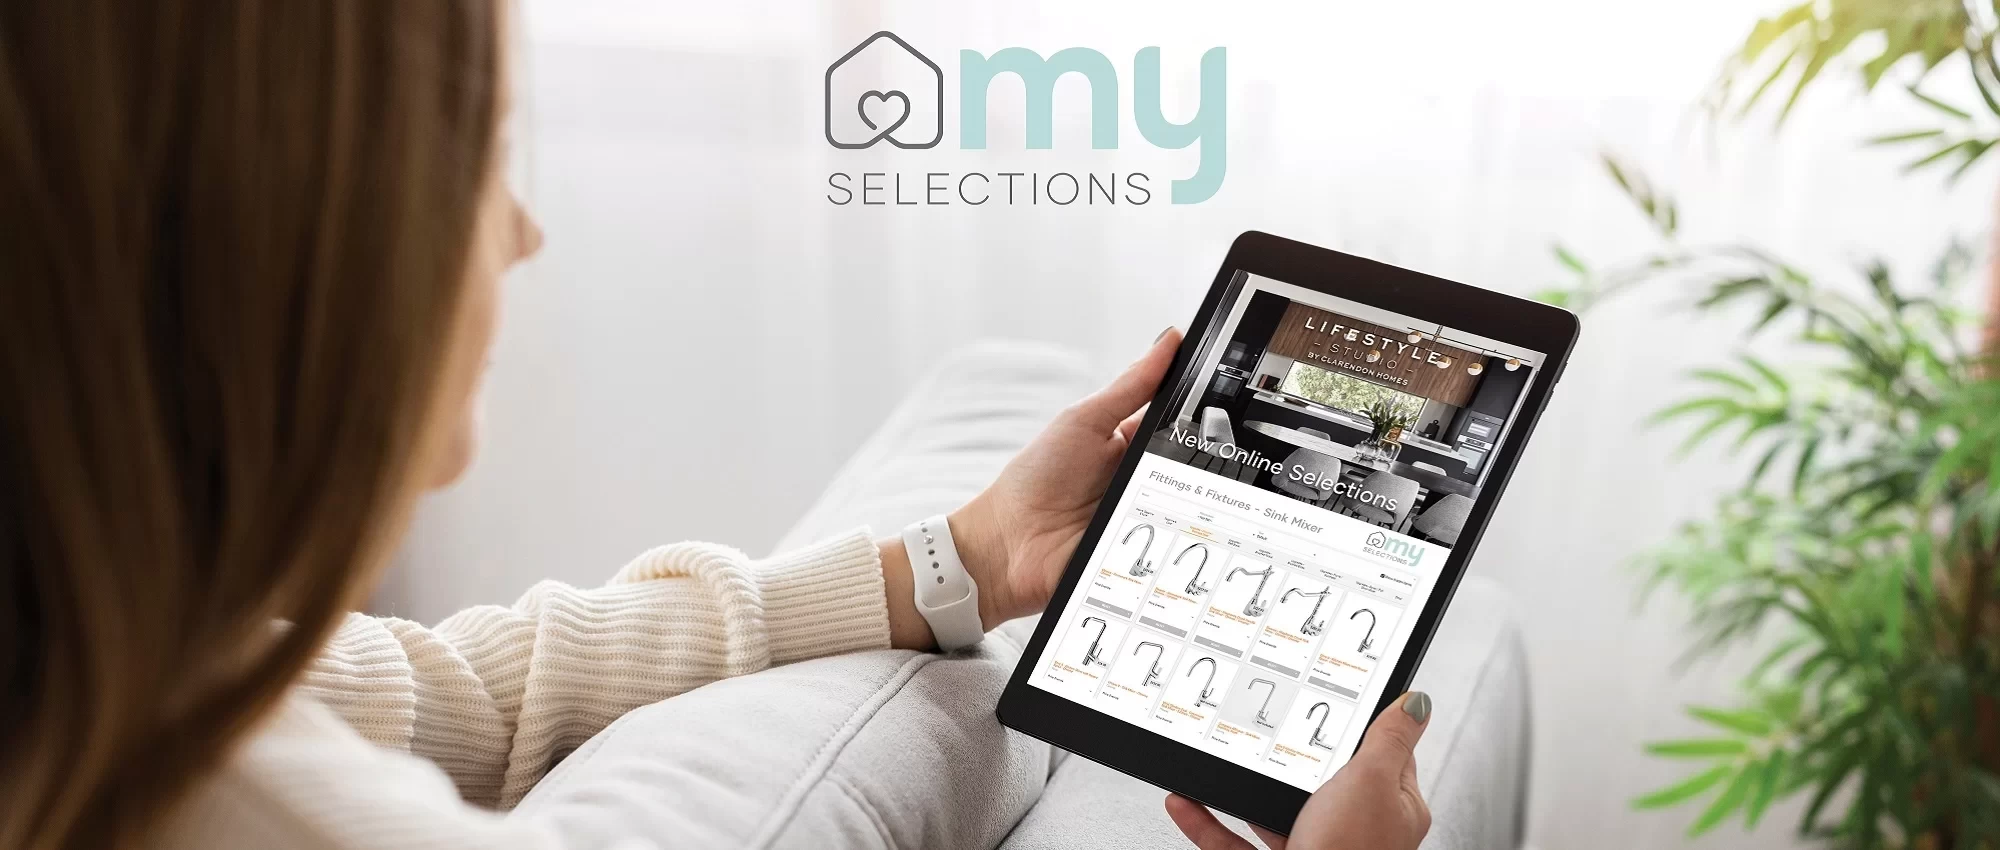 nsw My-Selections ipad-myselections-image-intro-page-website-banner